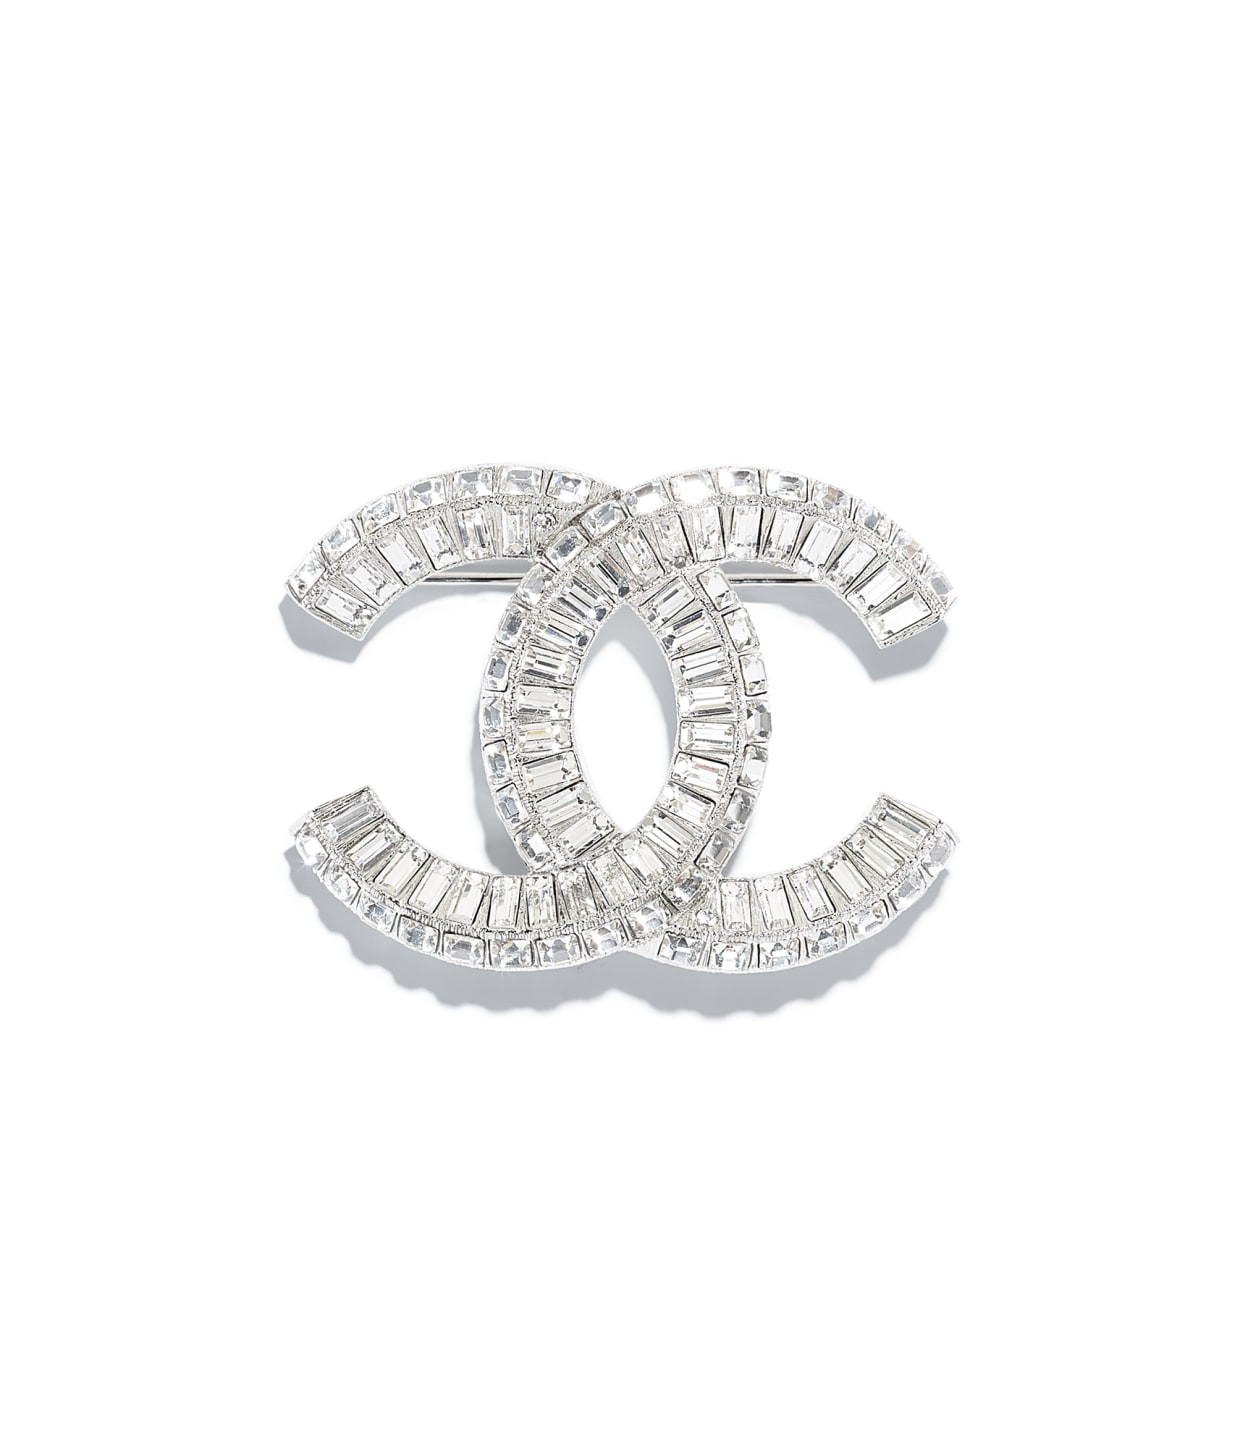 Chanel Brooches
 Metal Strass Silver Crystal Brooch